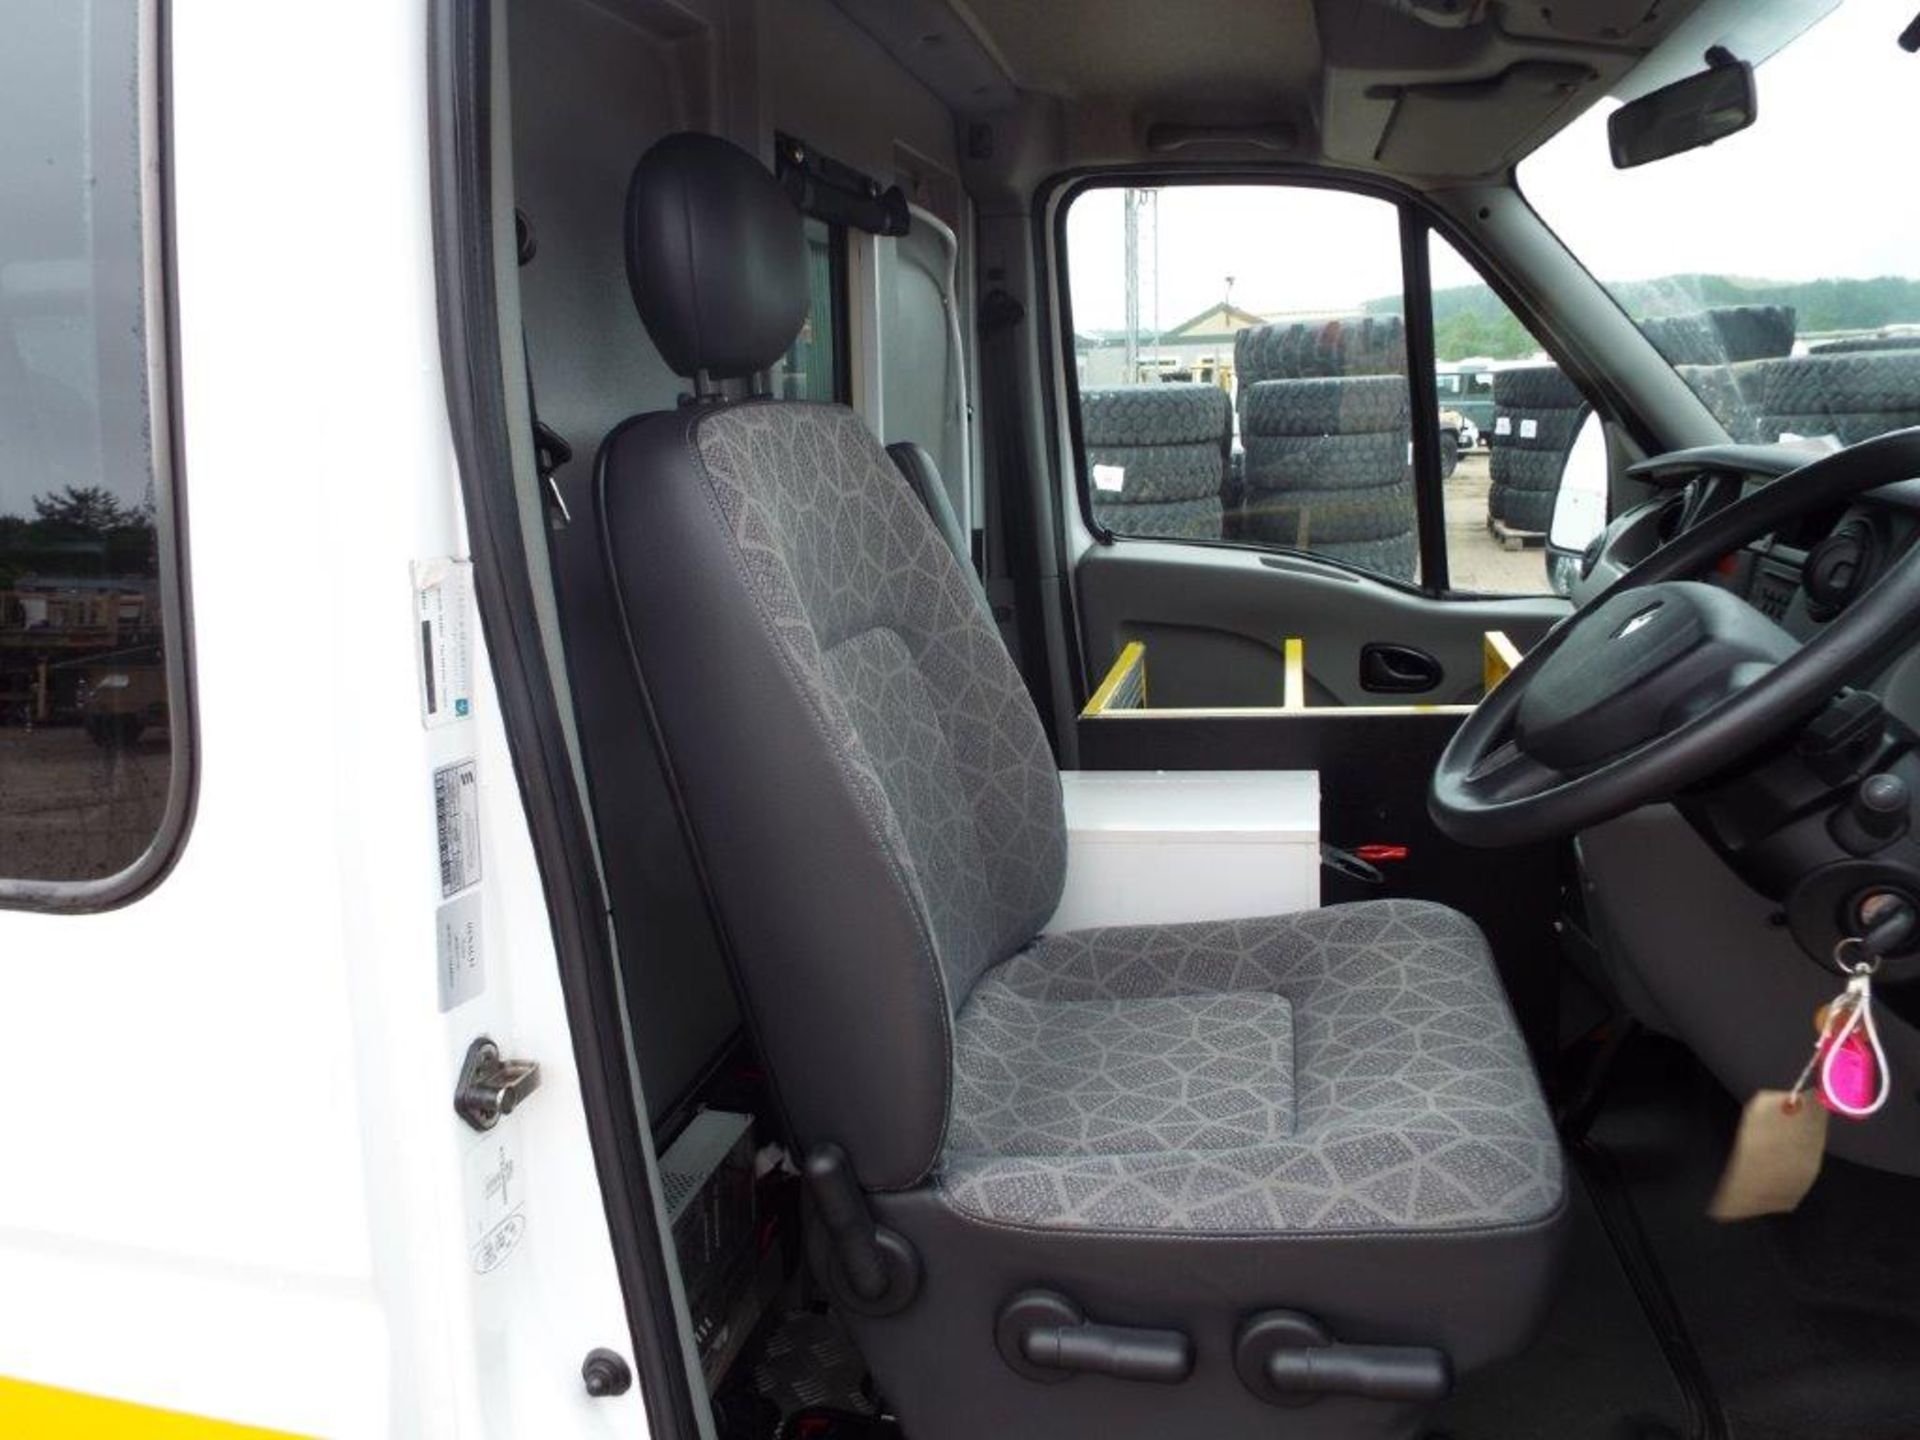 Renault Master 2.5 DCI Patient Transfer Bus with Ricon 350KG Tail Lift - Image 14 of 29